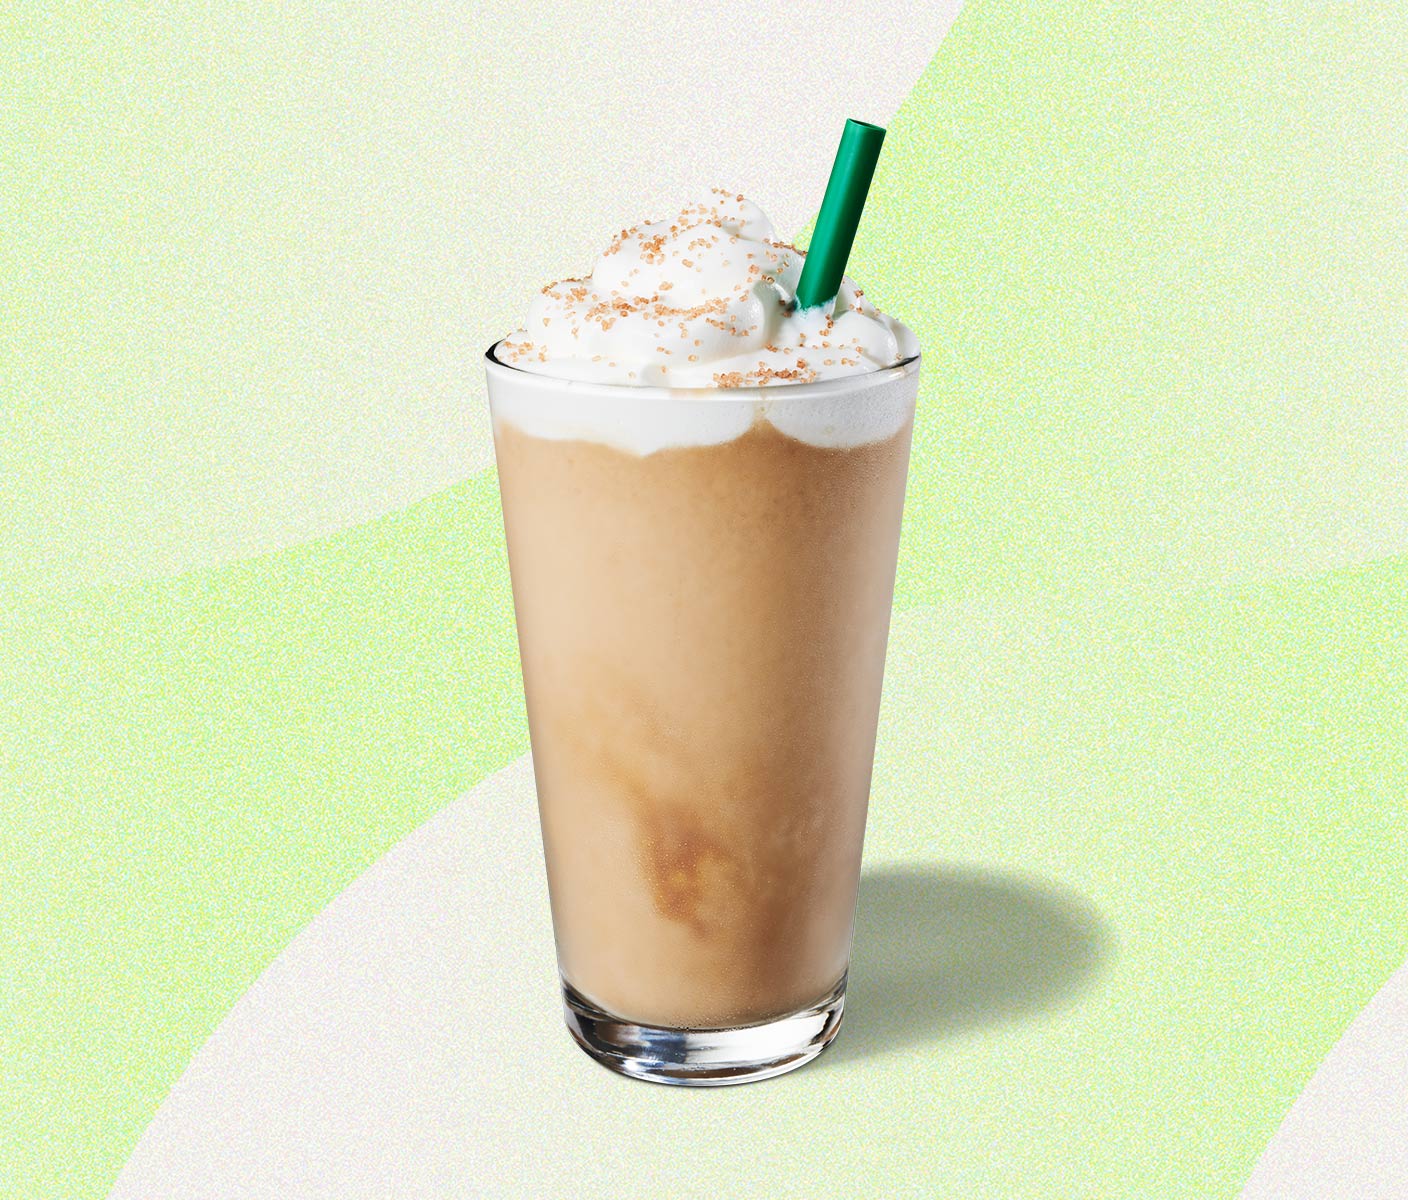 Blended coffee beverage with whipped cream and a green straw in a tall glass.